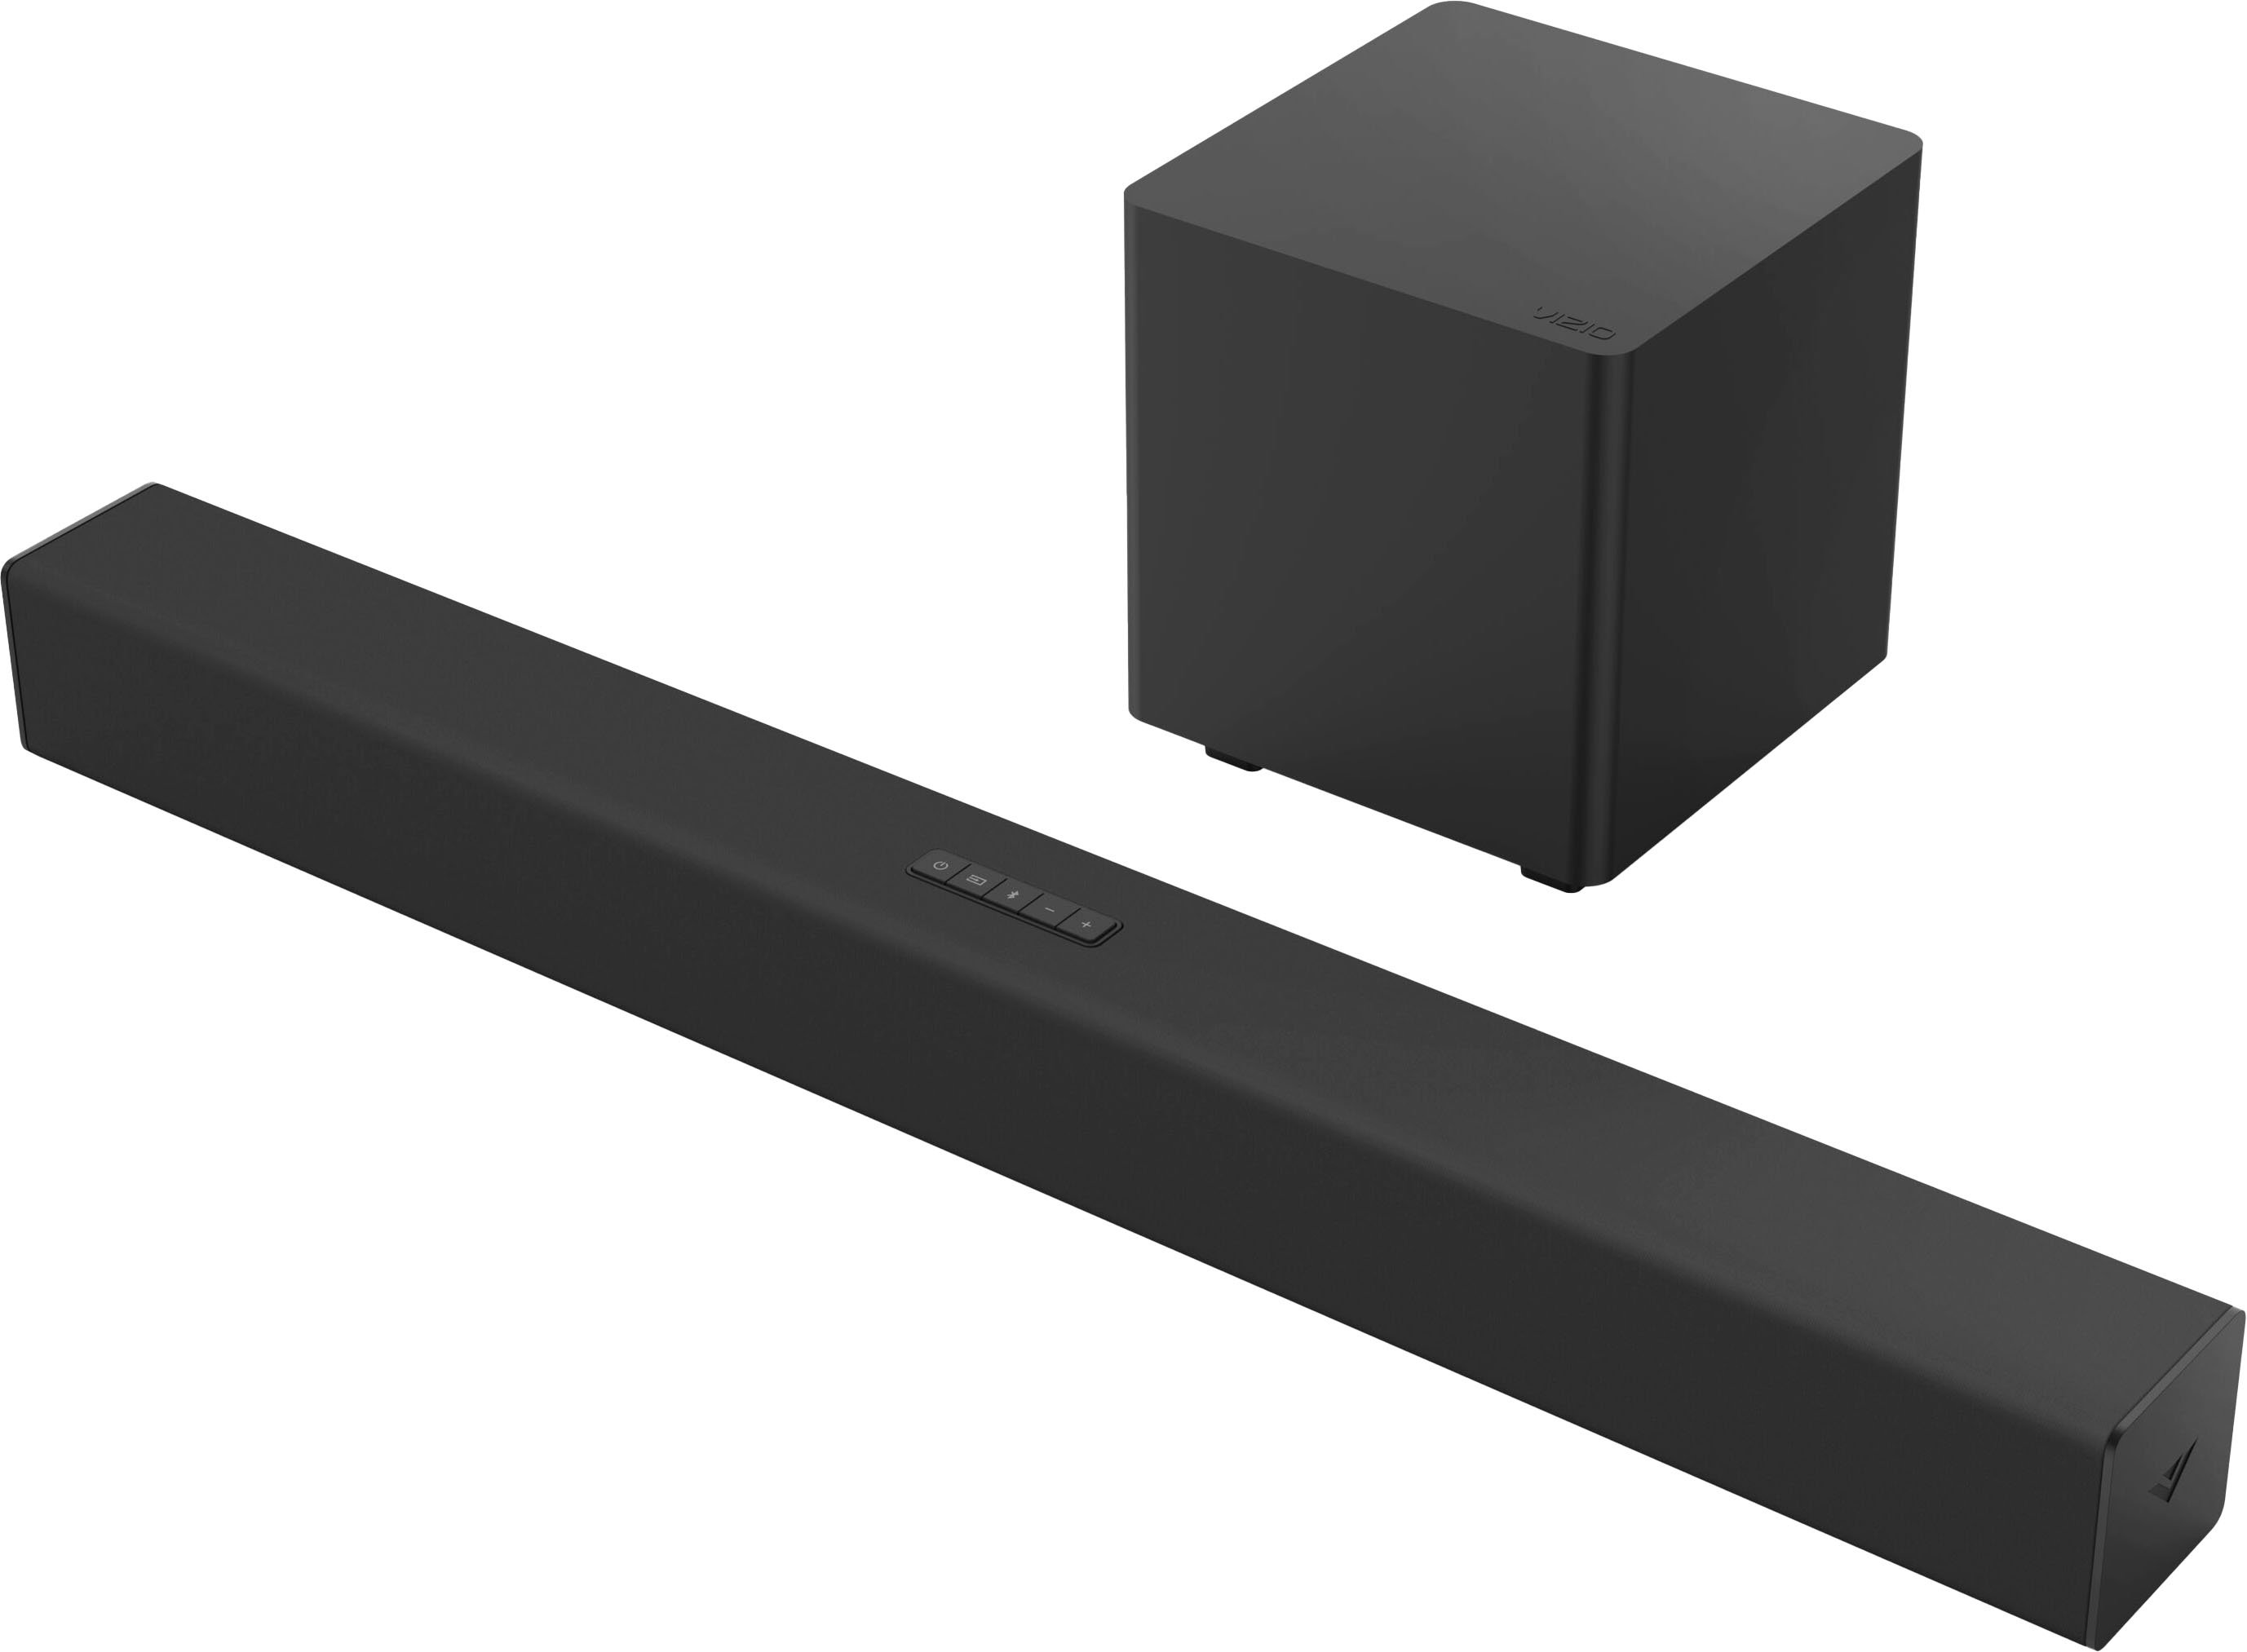 Angle View: VIZIO 2.1 Home Theater Sound Bar with DTS Virtual:X, Wireless Subwoofer SB3221n-J6